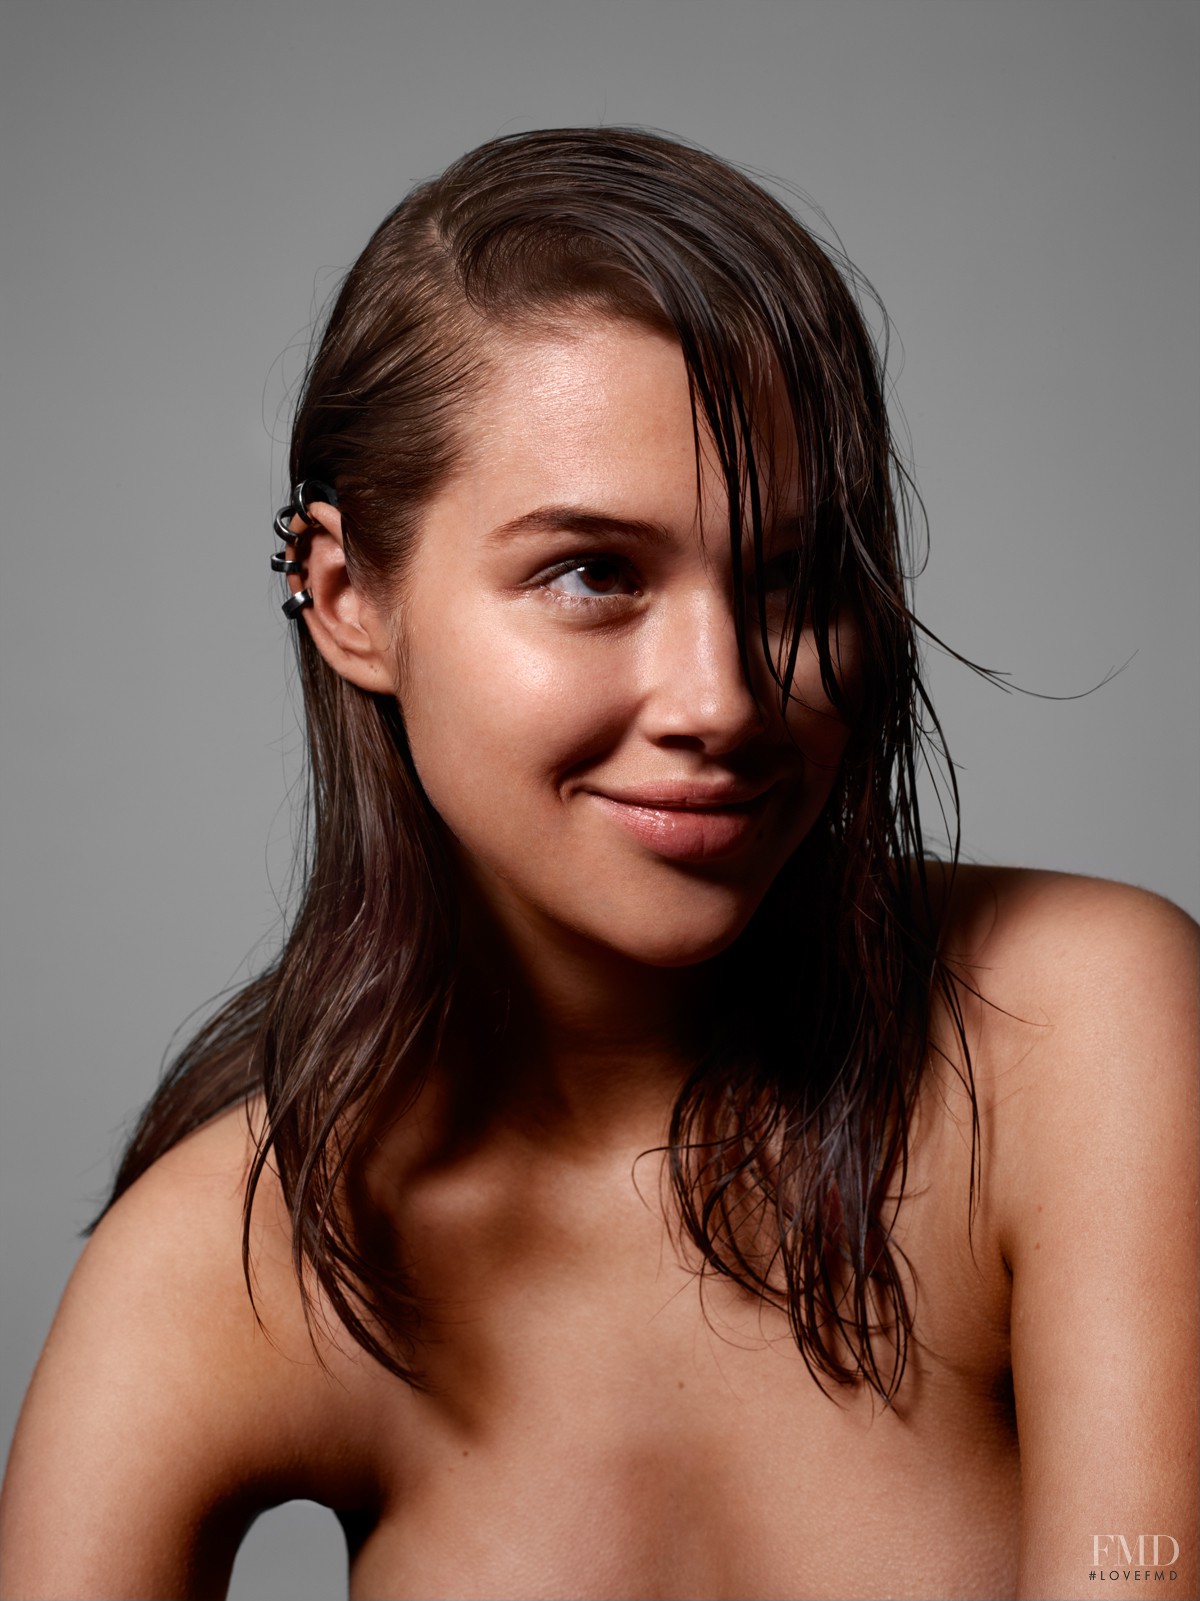 anais pouliot topless makes for a